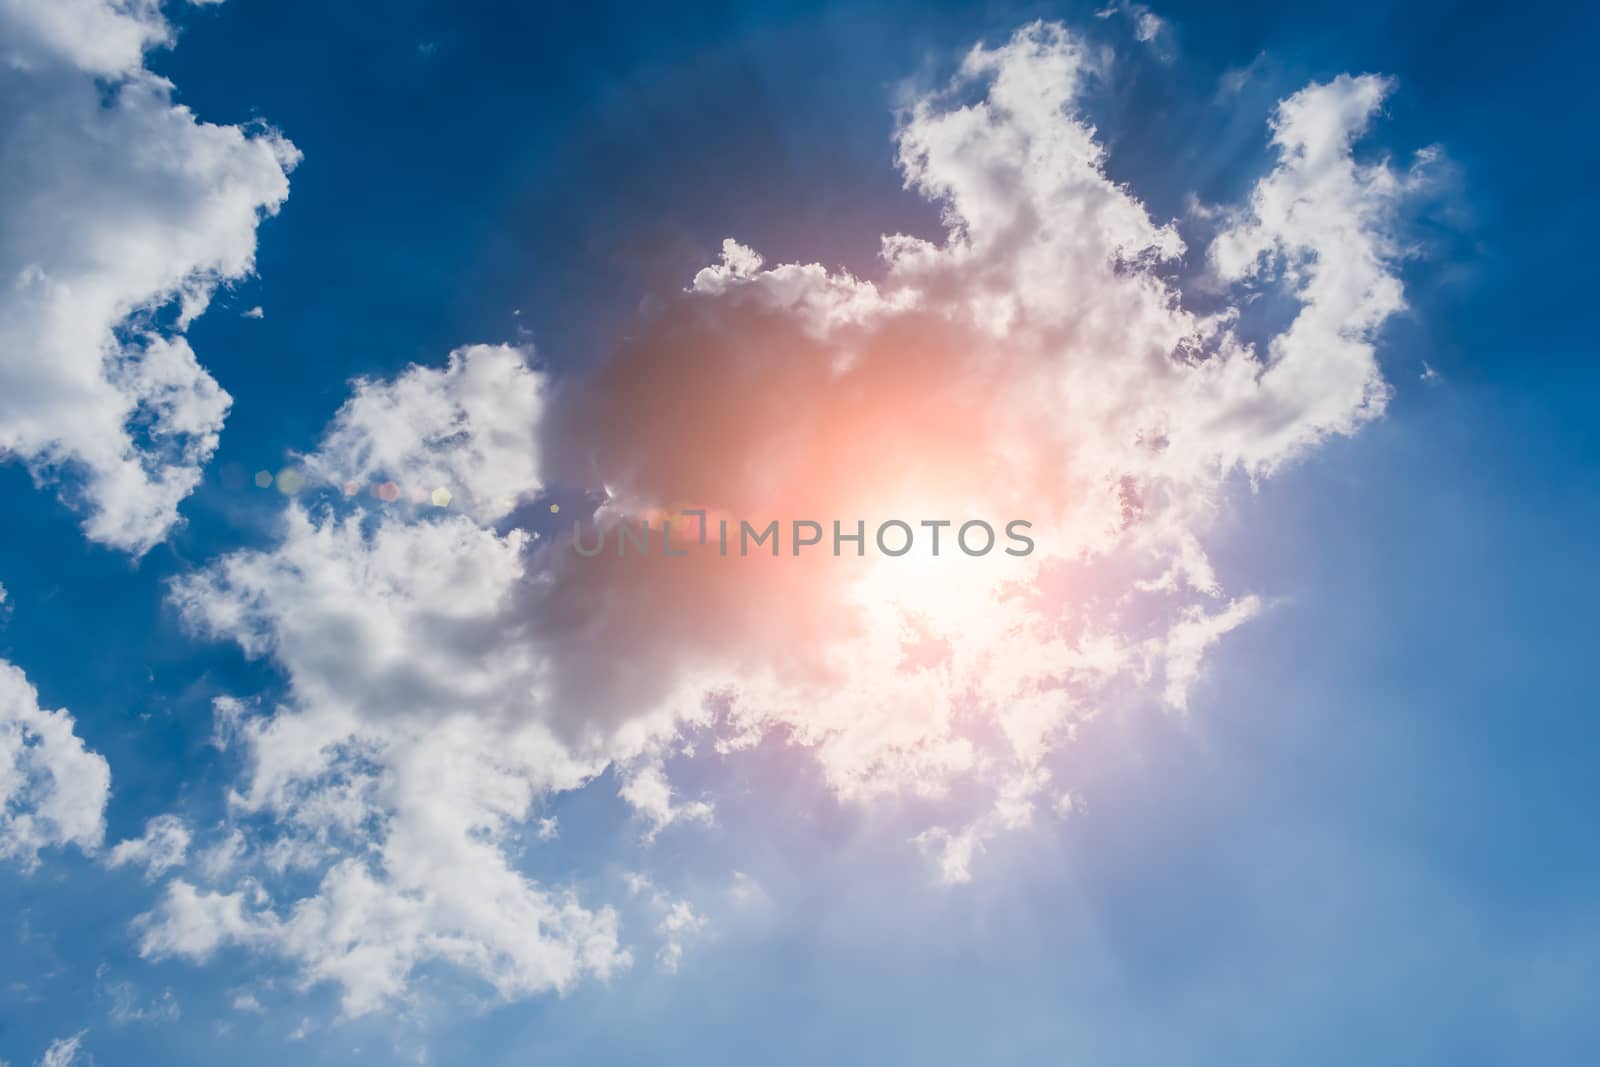 The bright rays of the sun making their way through the clouds ha blue sky